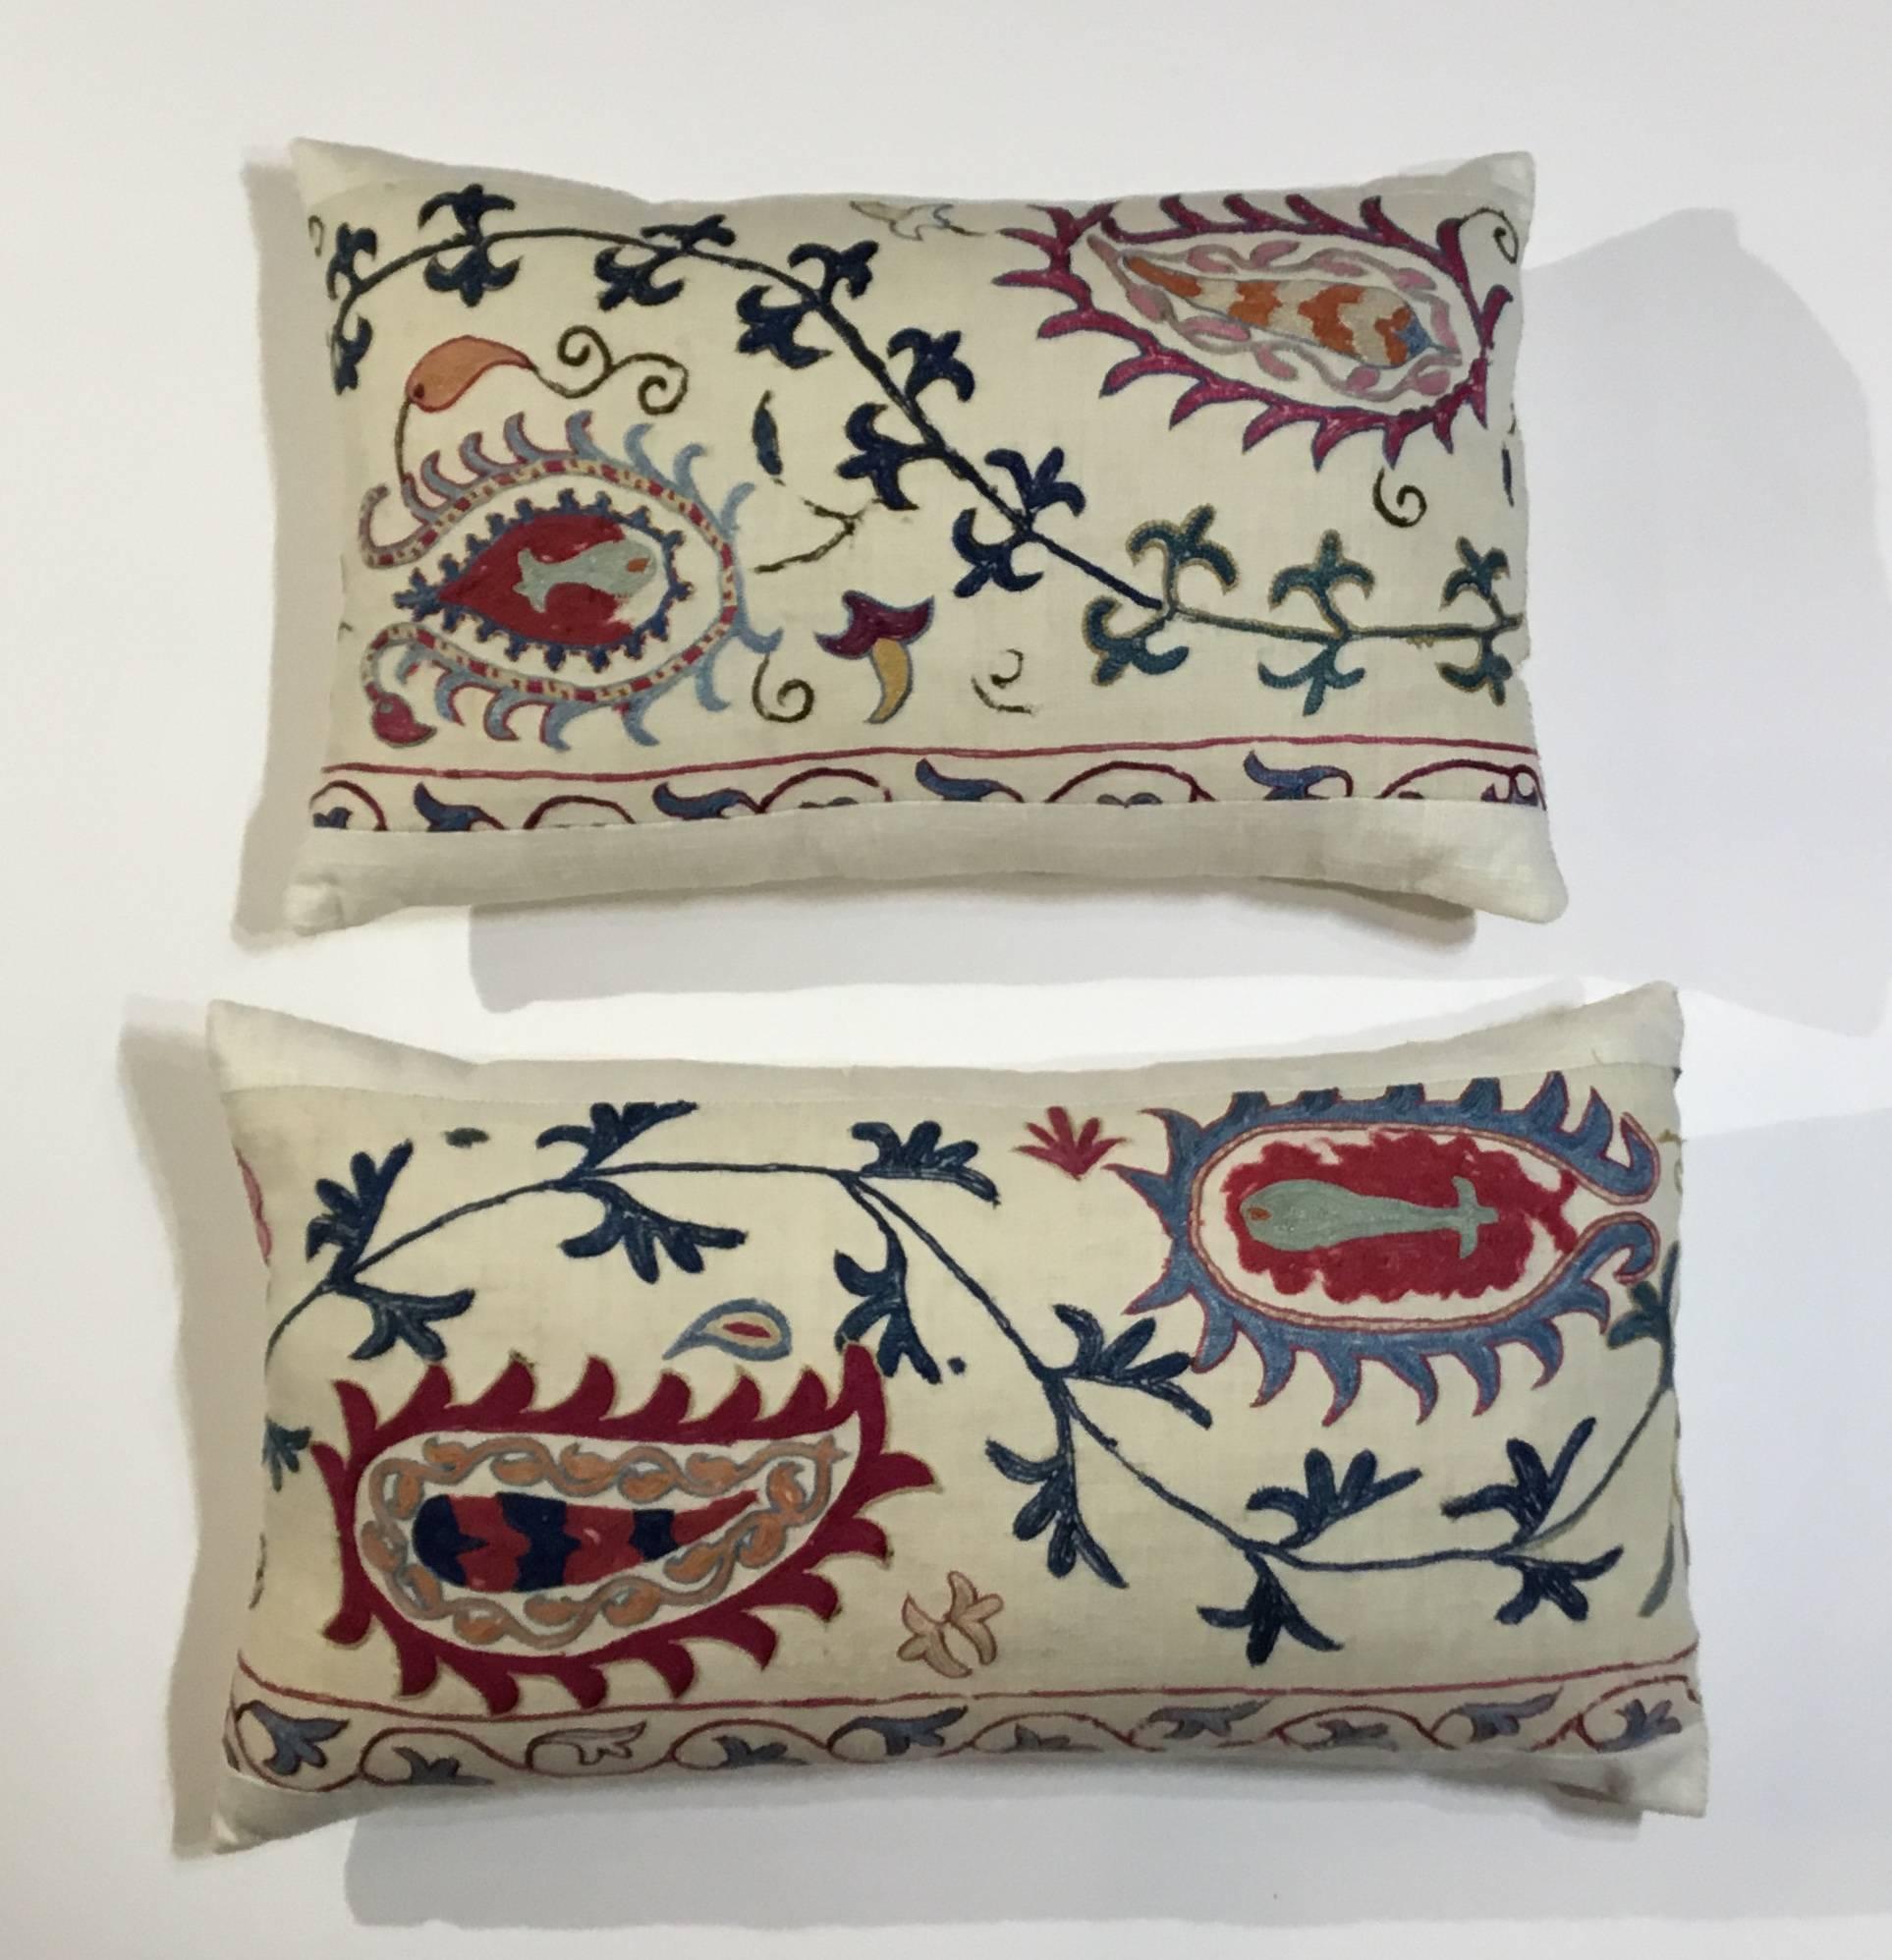 Fantastic pair of pillows made of antique hand embroidery Suzani textile, beautiful vine and flowers motifs. Fresh insert, silk backing. Some missing embroidery due to age and oxidization,
great decorative pillows.
Size: 22”.5 x 12”
18”.5 x 11”.5.